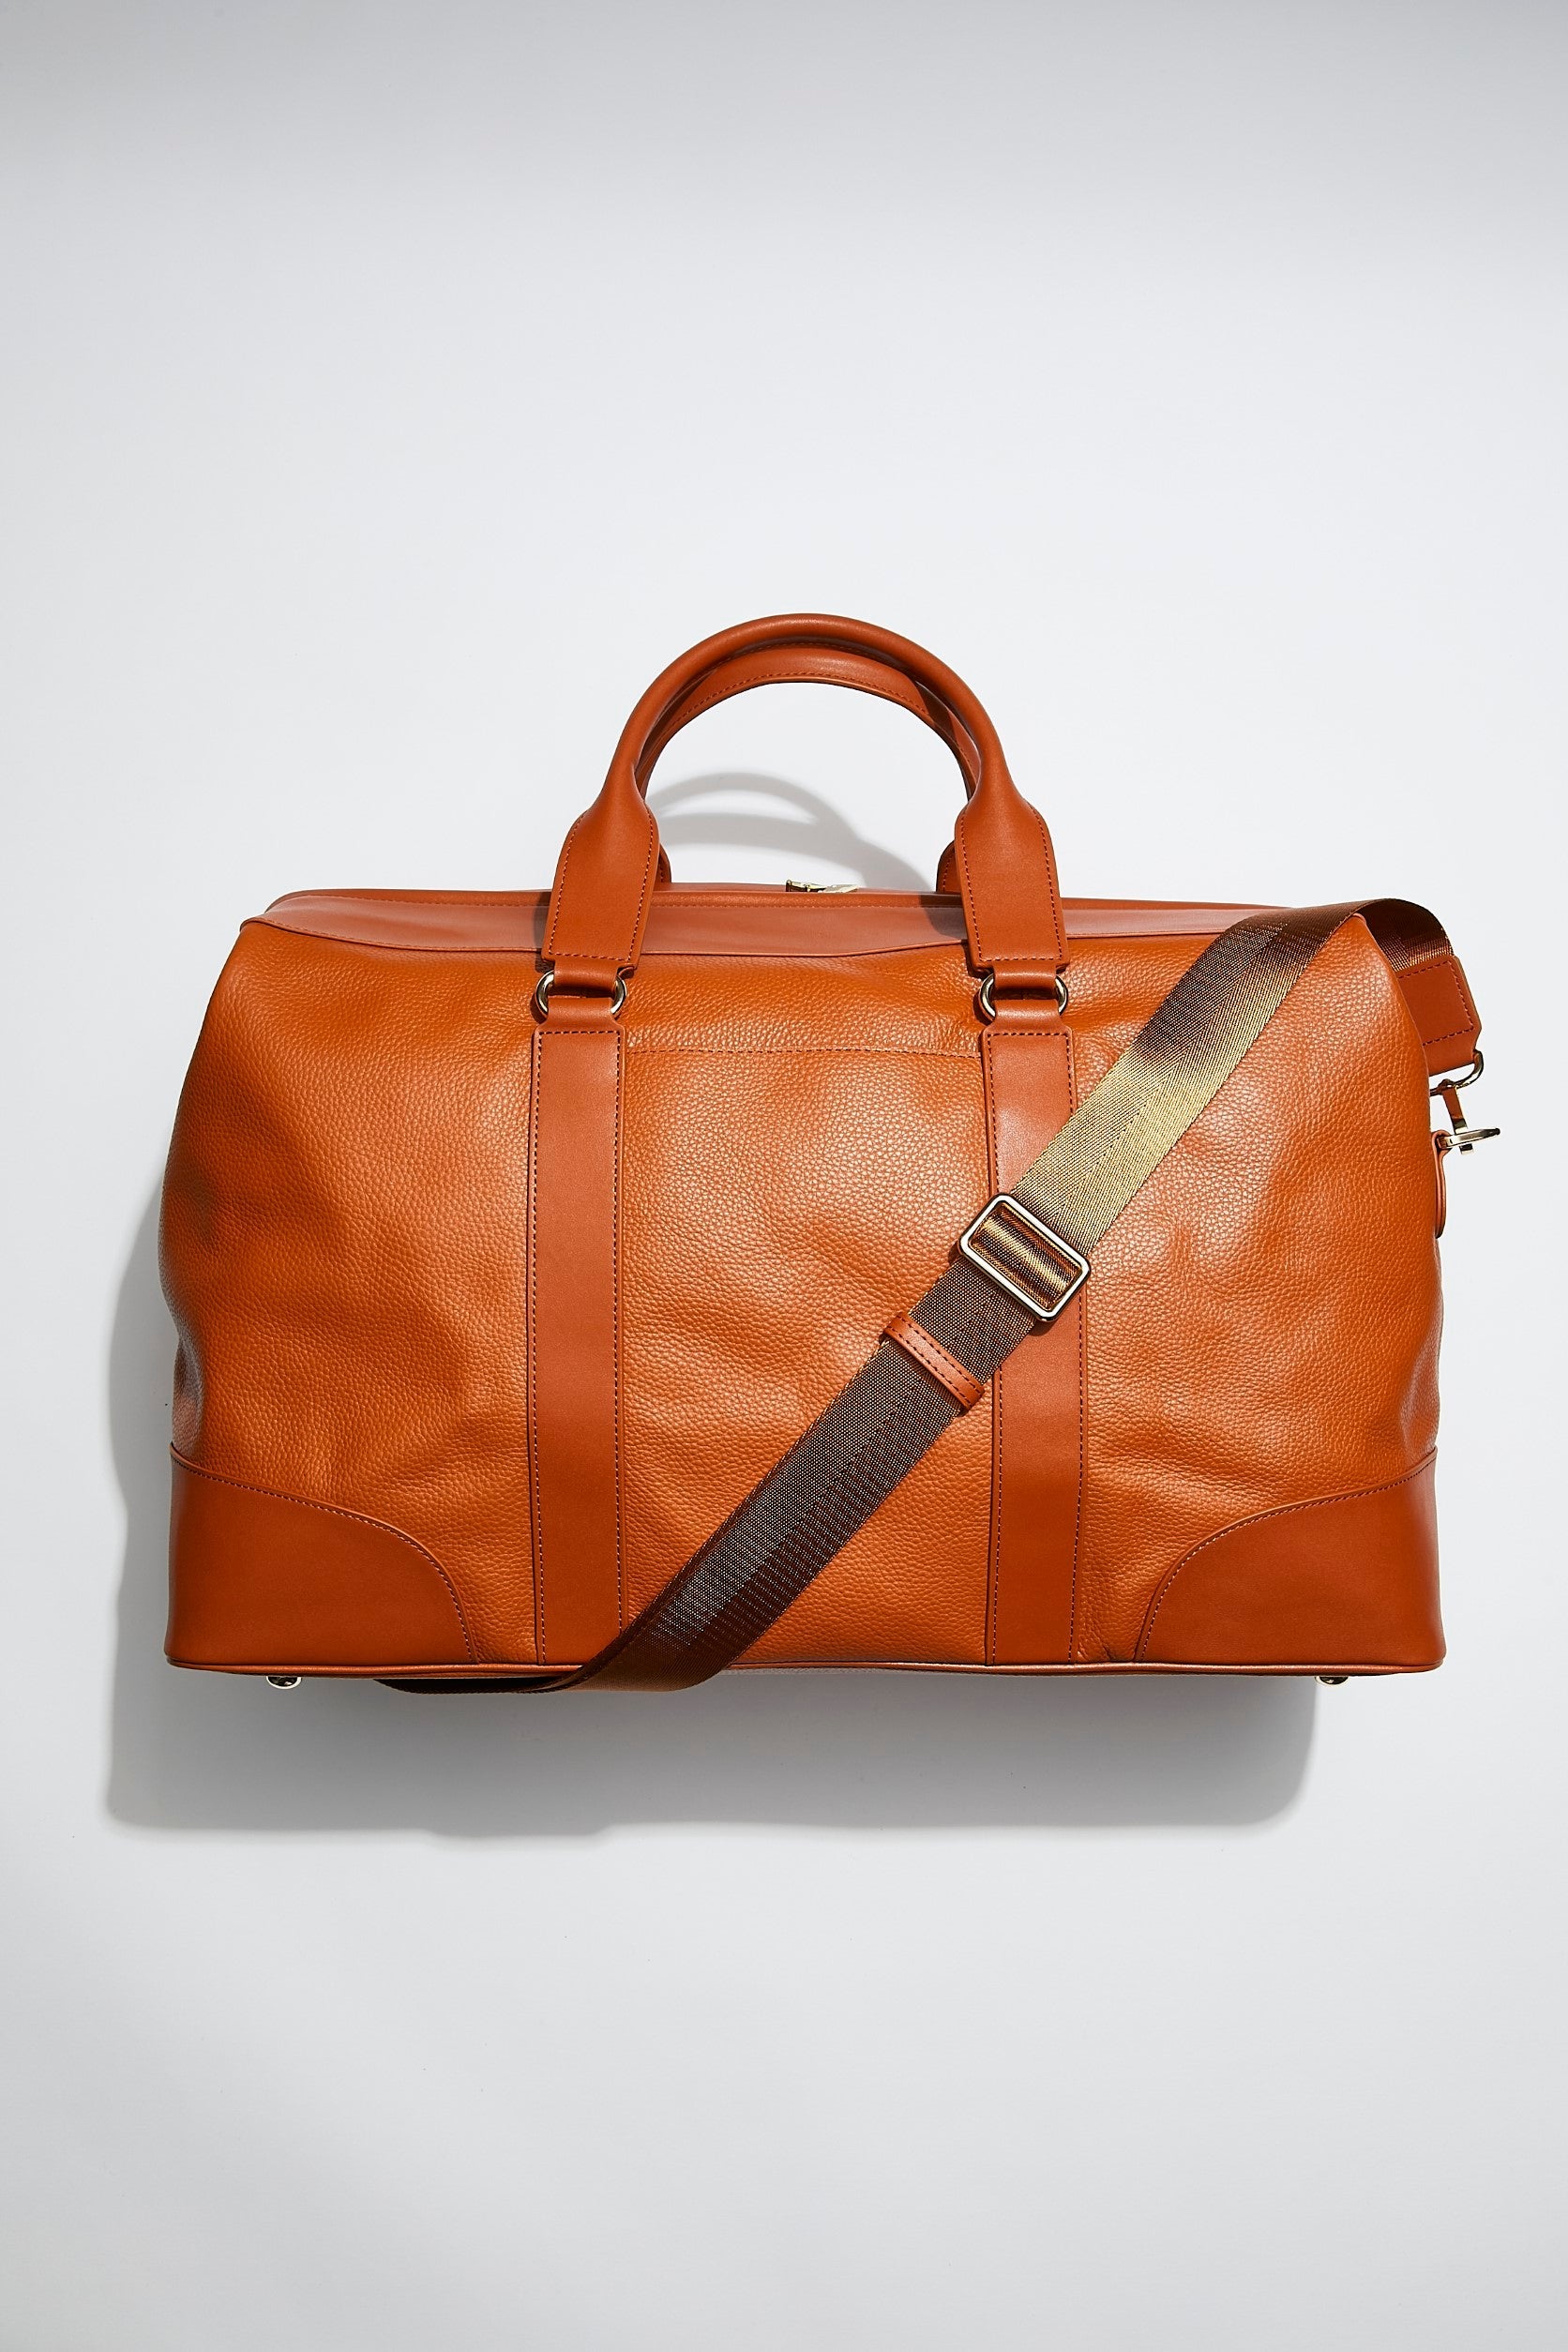 front view of mon purse's camel brown leather weekender bag that is large enough for weekends away and overnight stays